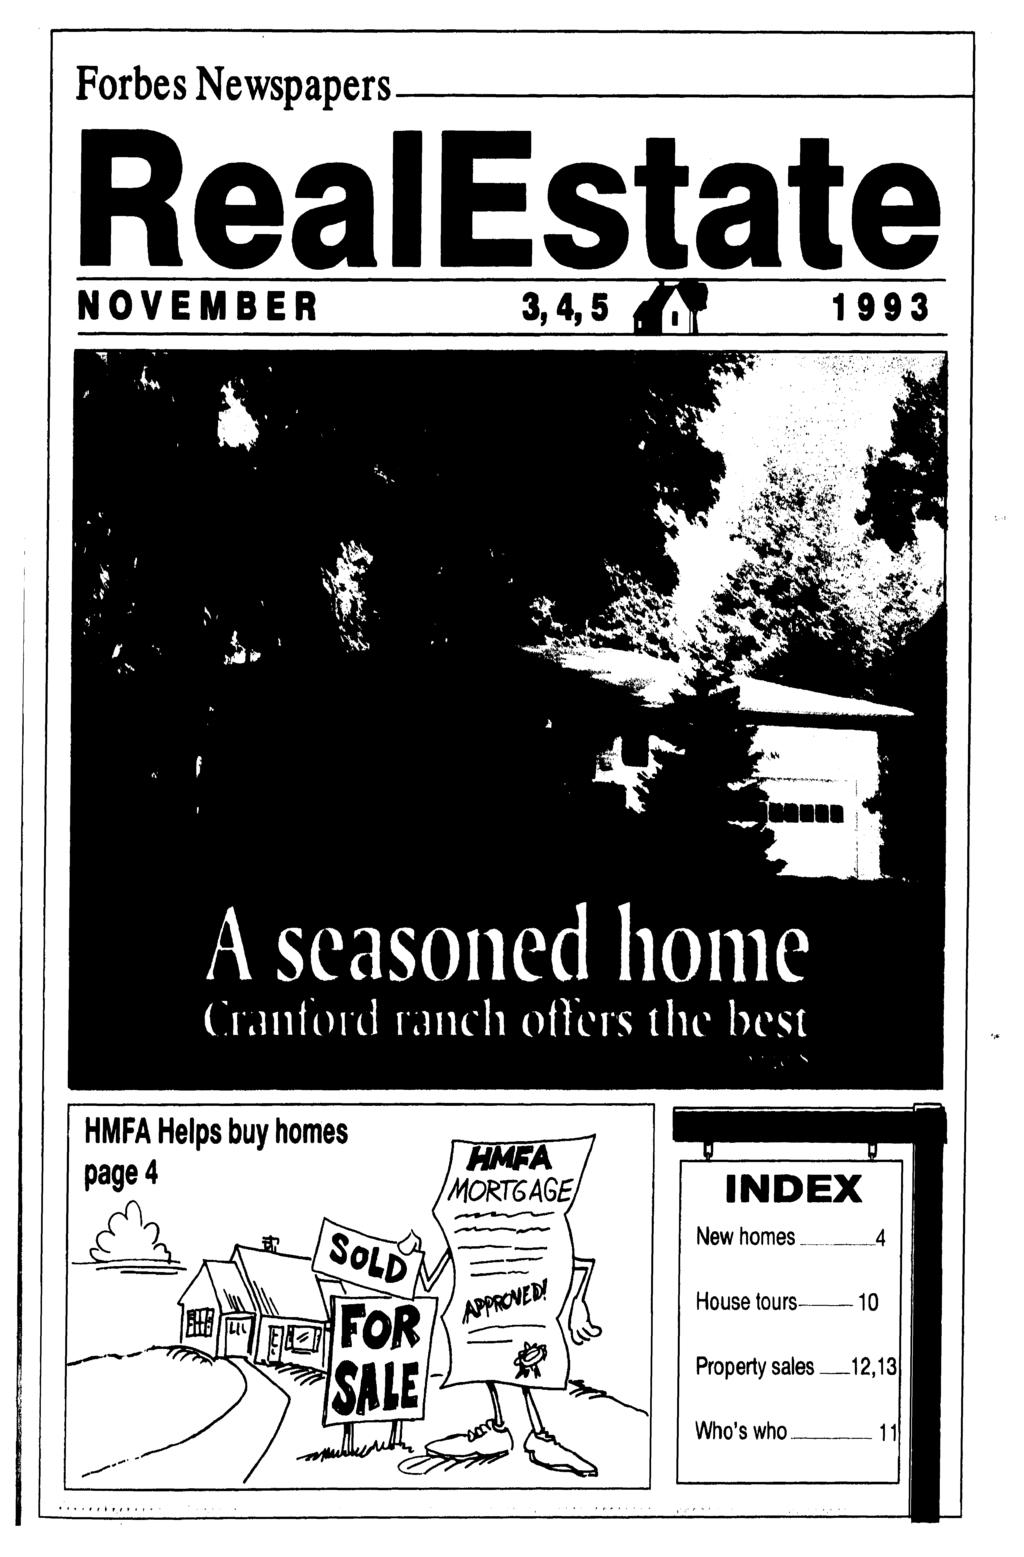 Forbes Newspapers NOVEMBER 3,4,5 g 1993 HMFA Helps buy homes page 4